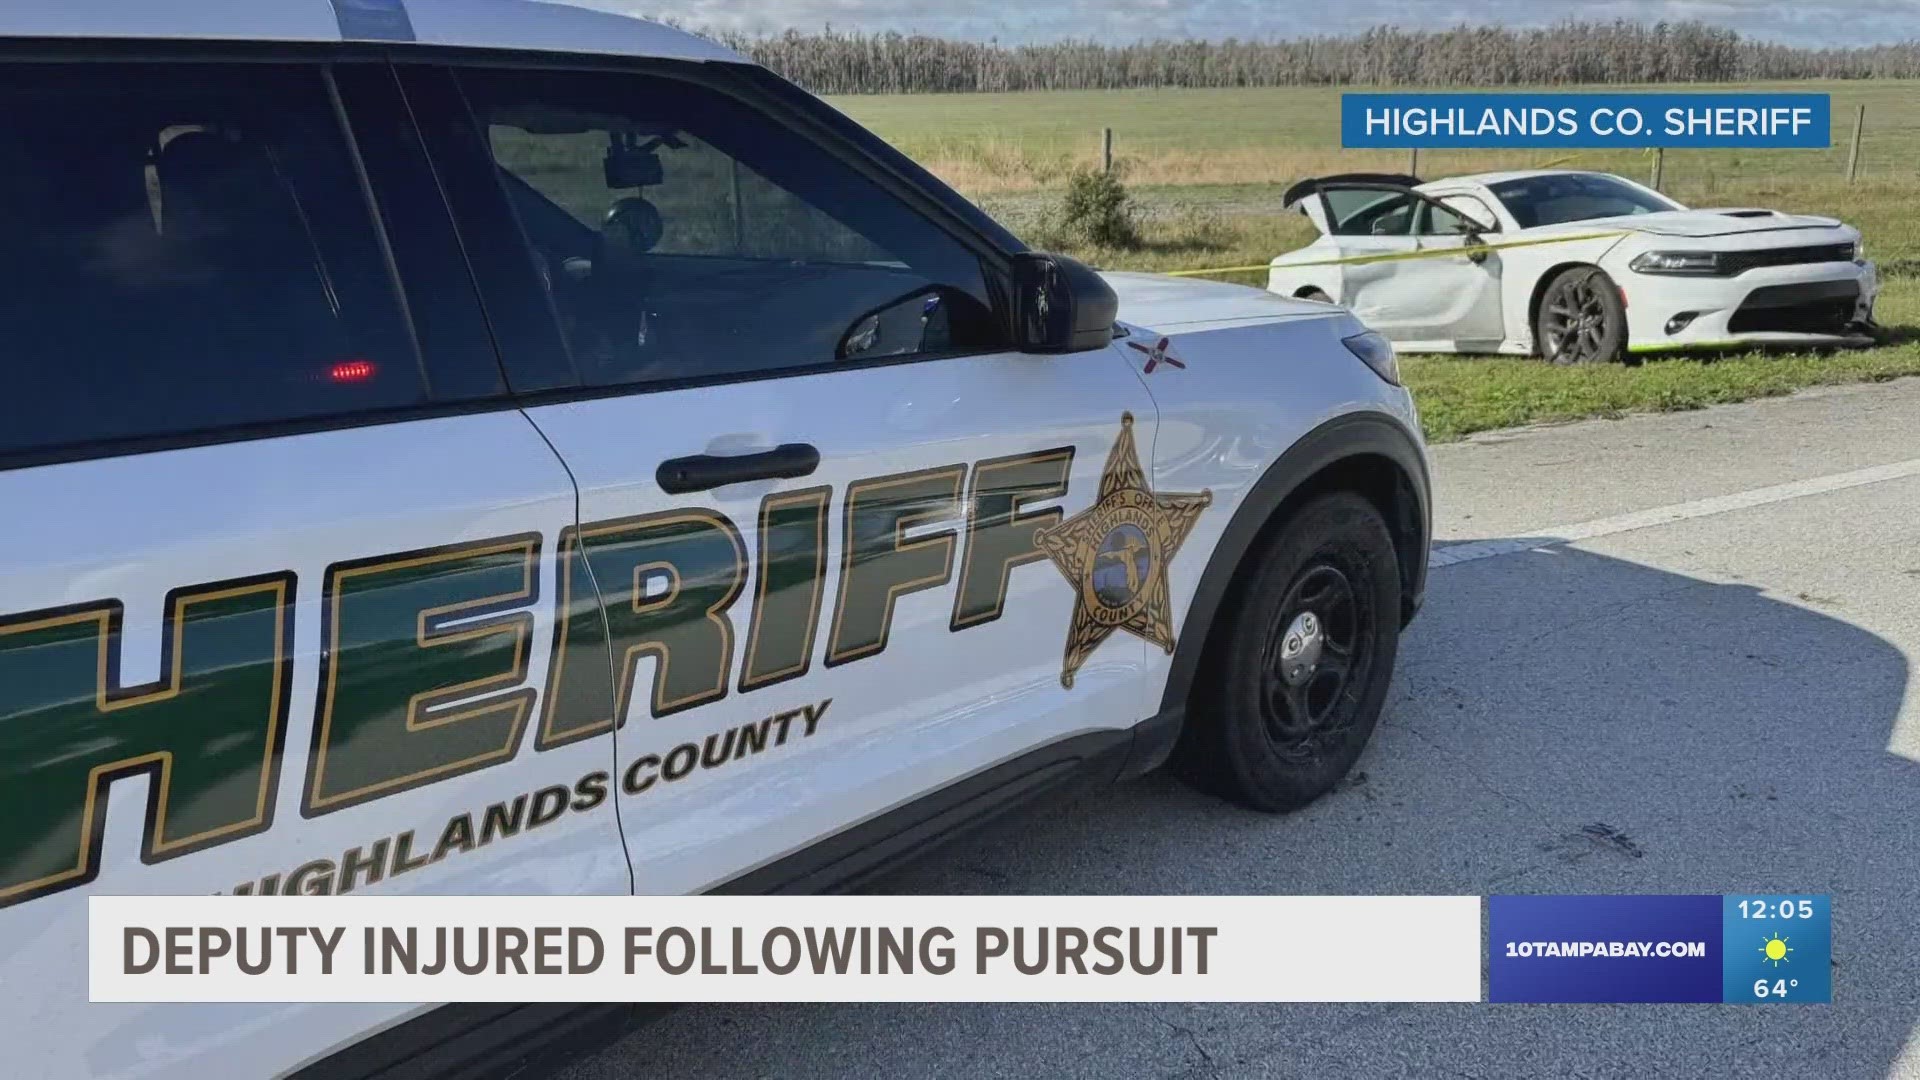 The chase reportedly spanned both Highlands and Hardee counties.